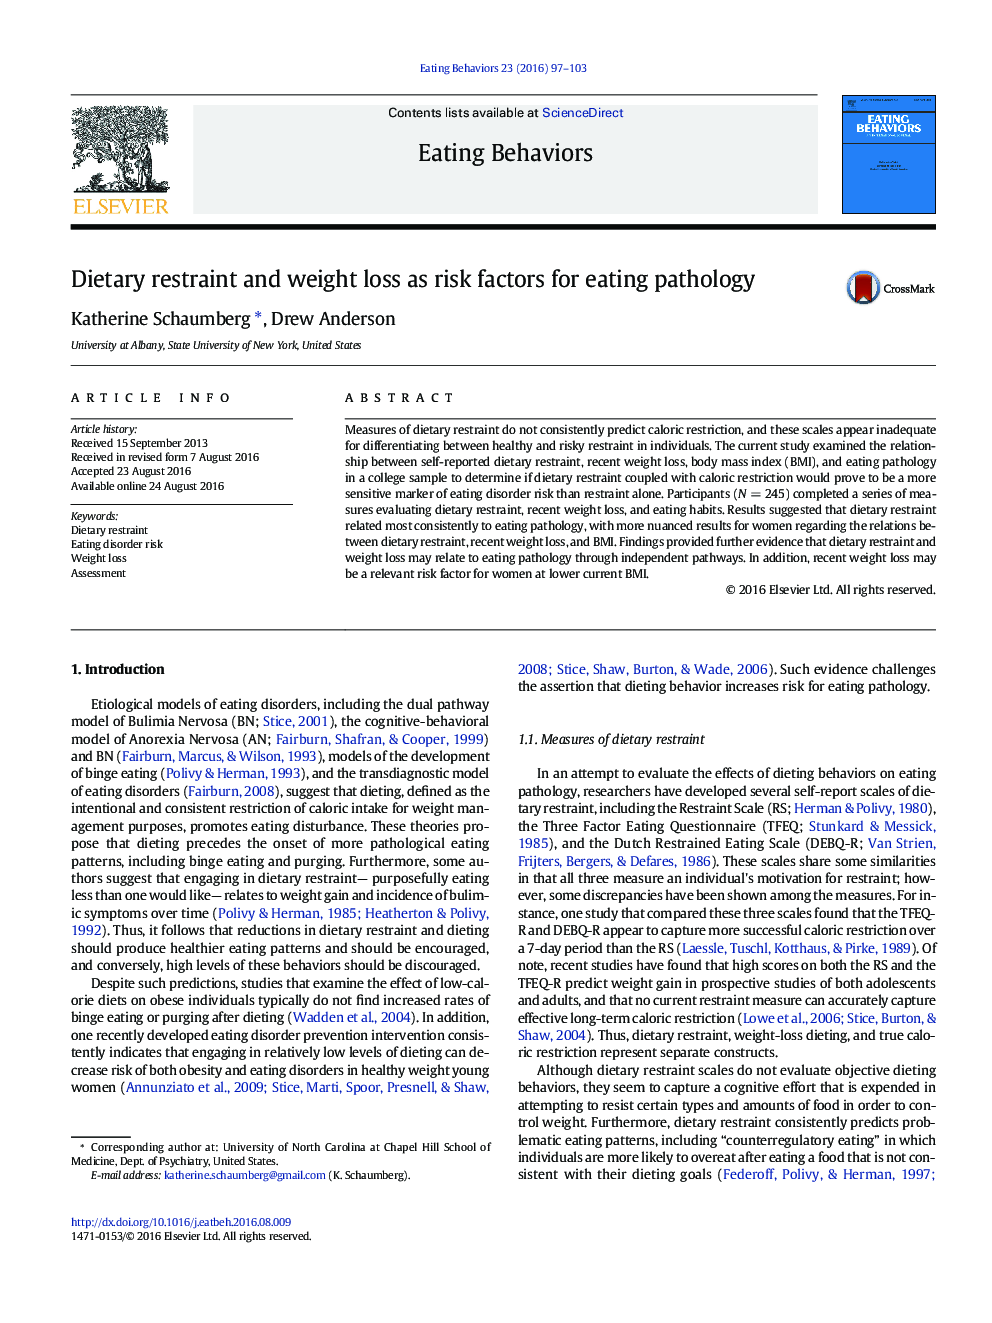 Dietary restraint and weight loss as risk factors for eating pathology